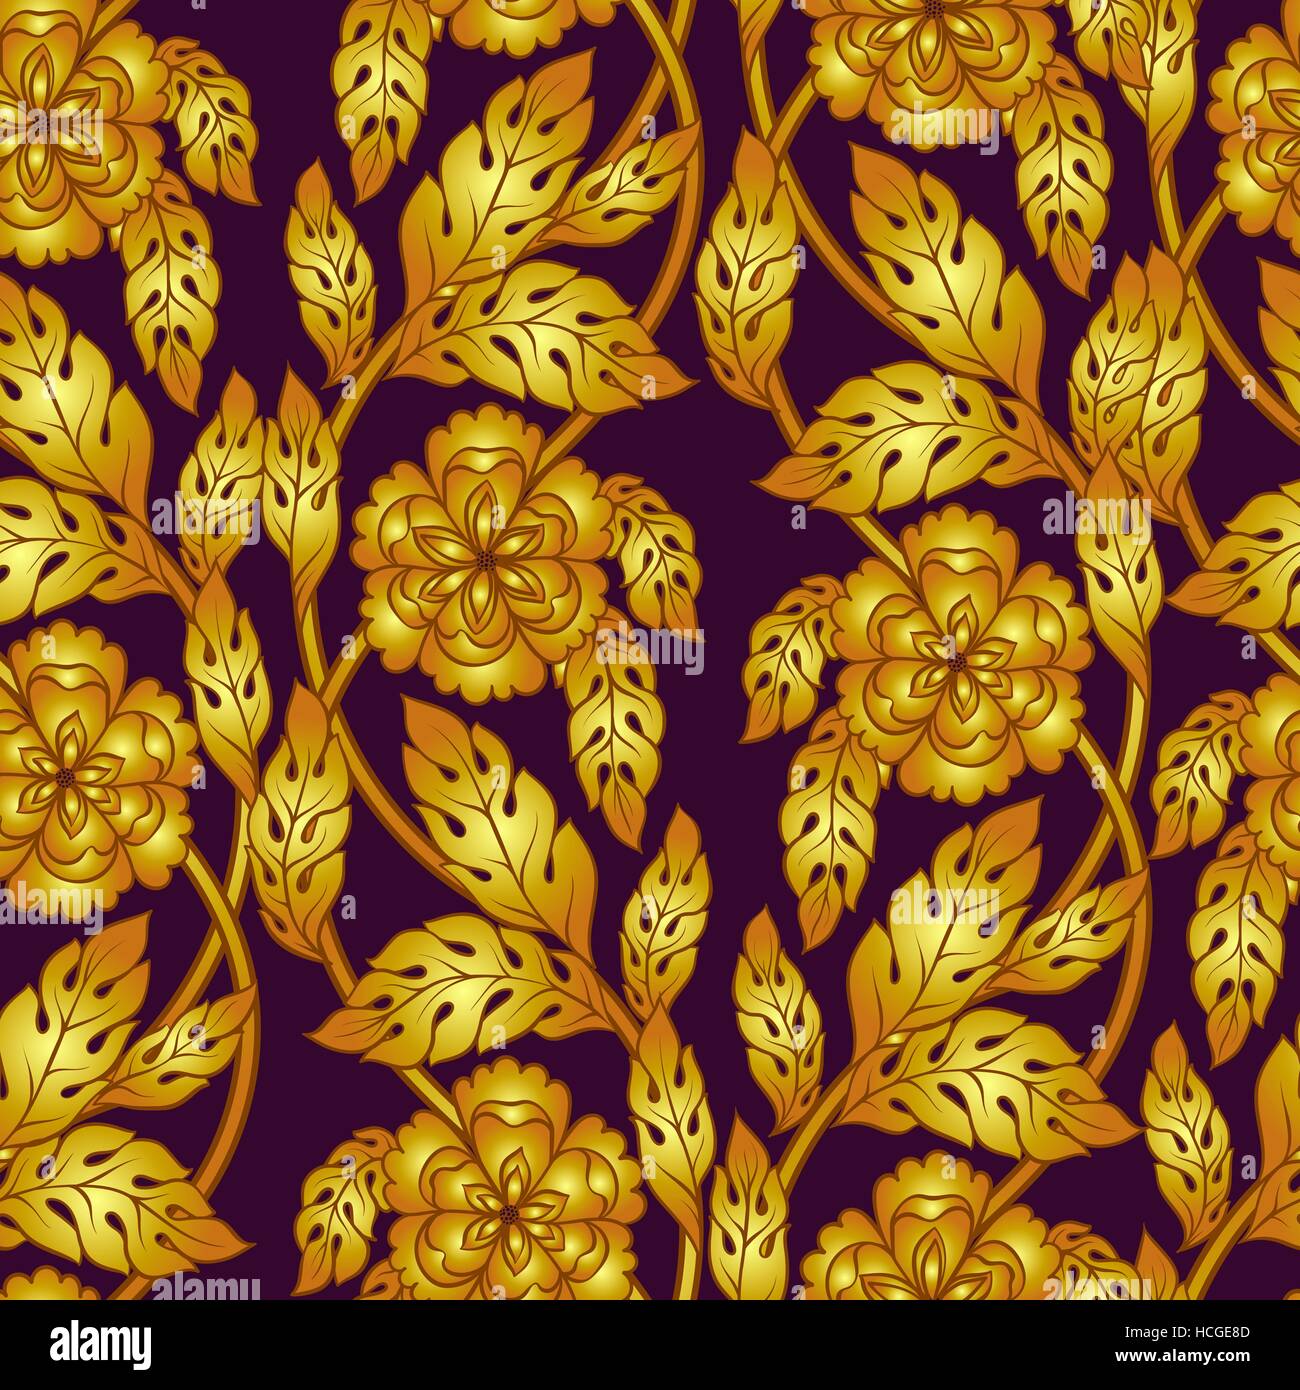 Vector seamless pattern with golden floral ornament. Ornamental lace backdrop. Ornate decor wallpaper. Endless texture. Luxury gold decorative 3d rose Stock Vector